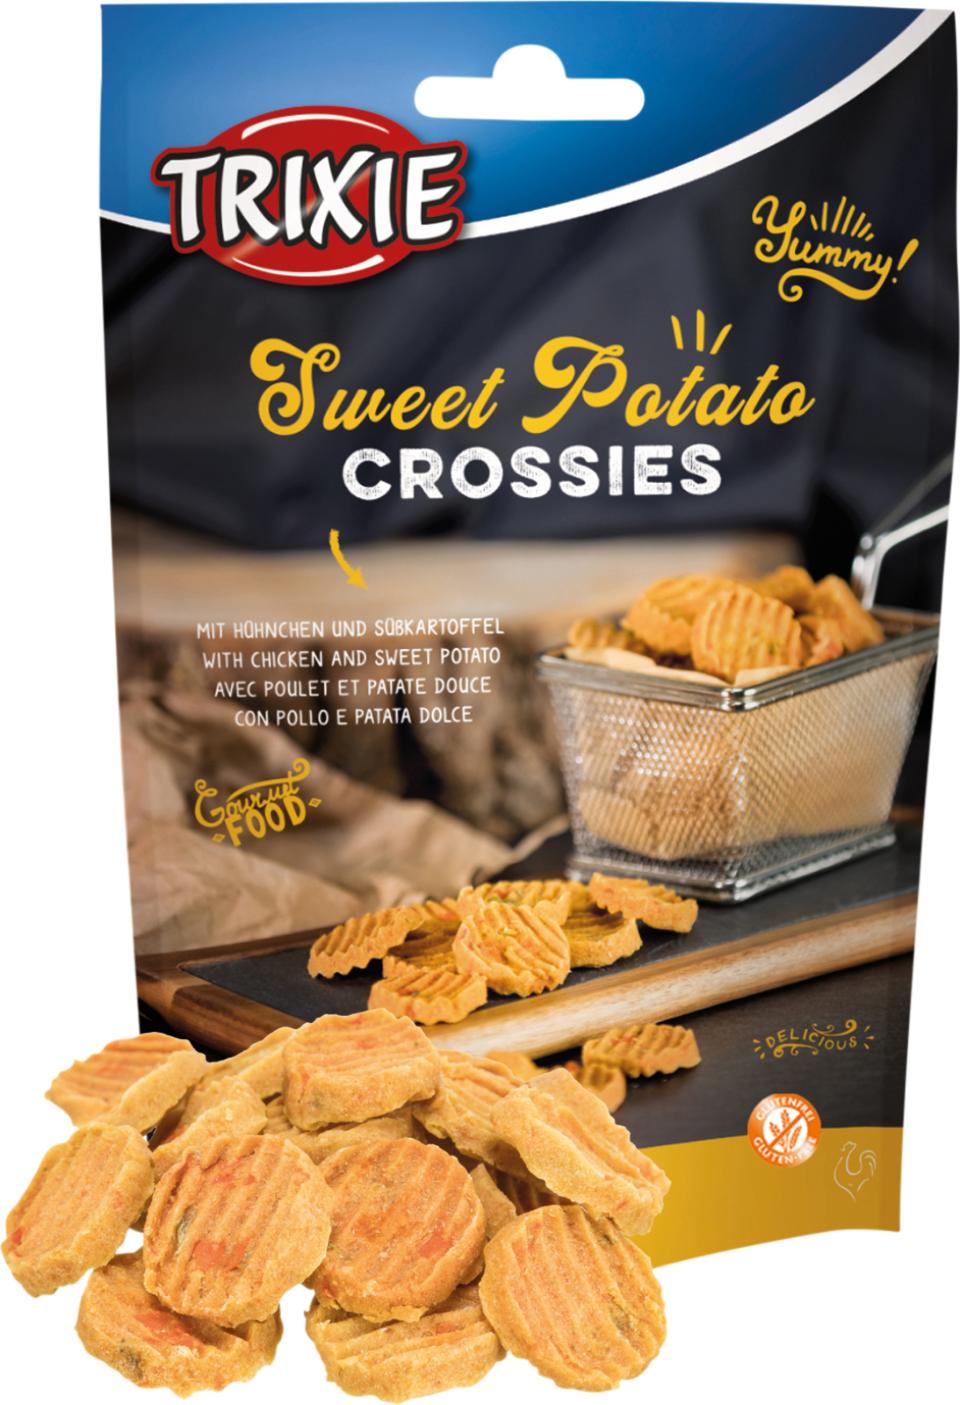 Sweet Potato Crossies with chicken